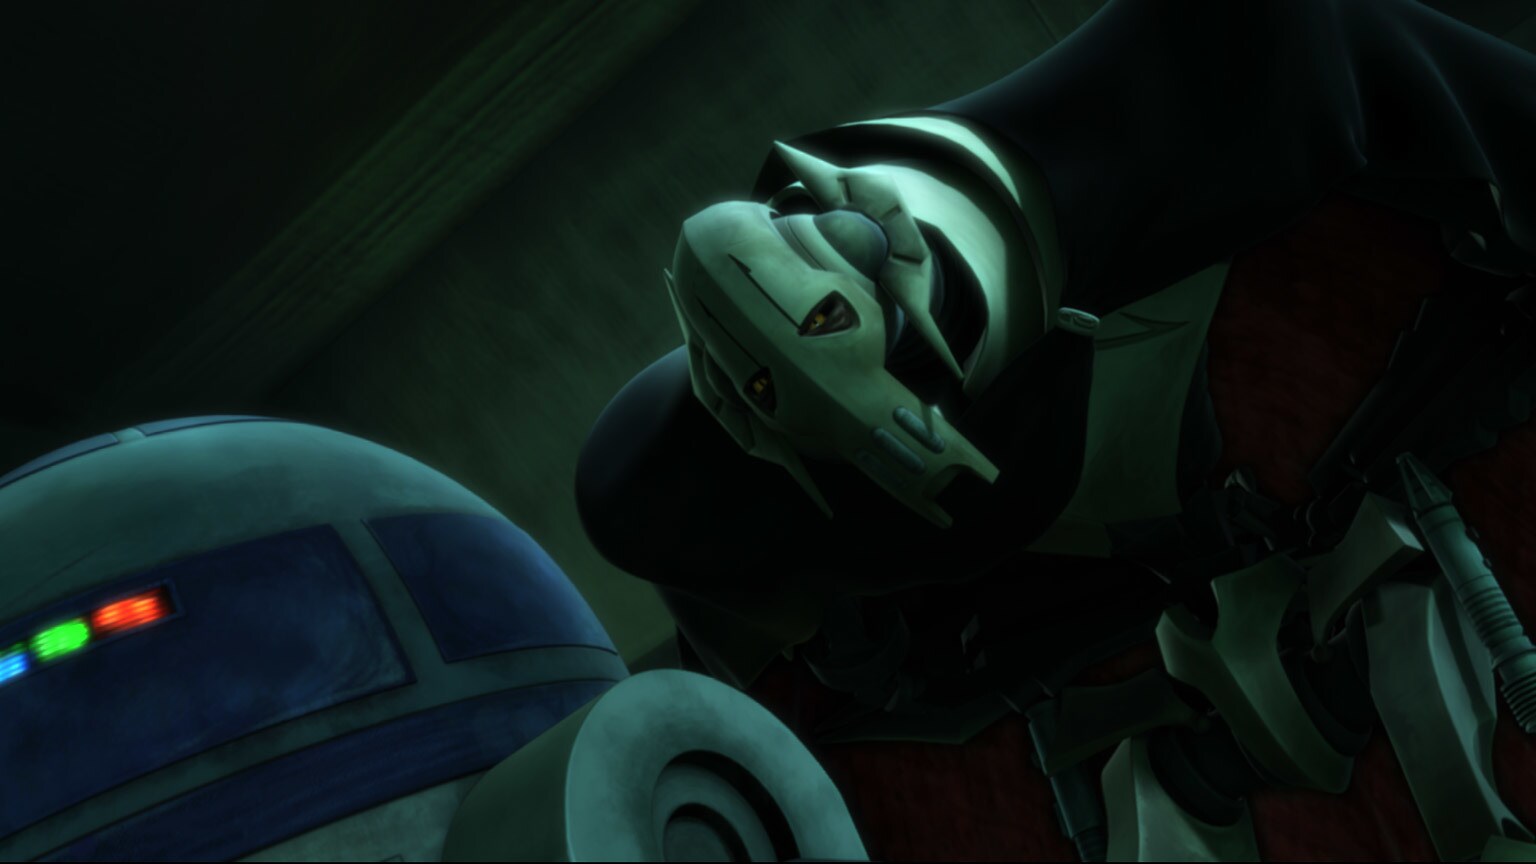 The Clone Wars Rewatch: A Spy Exposed in "Duel of the Droids"